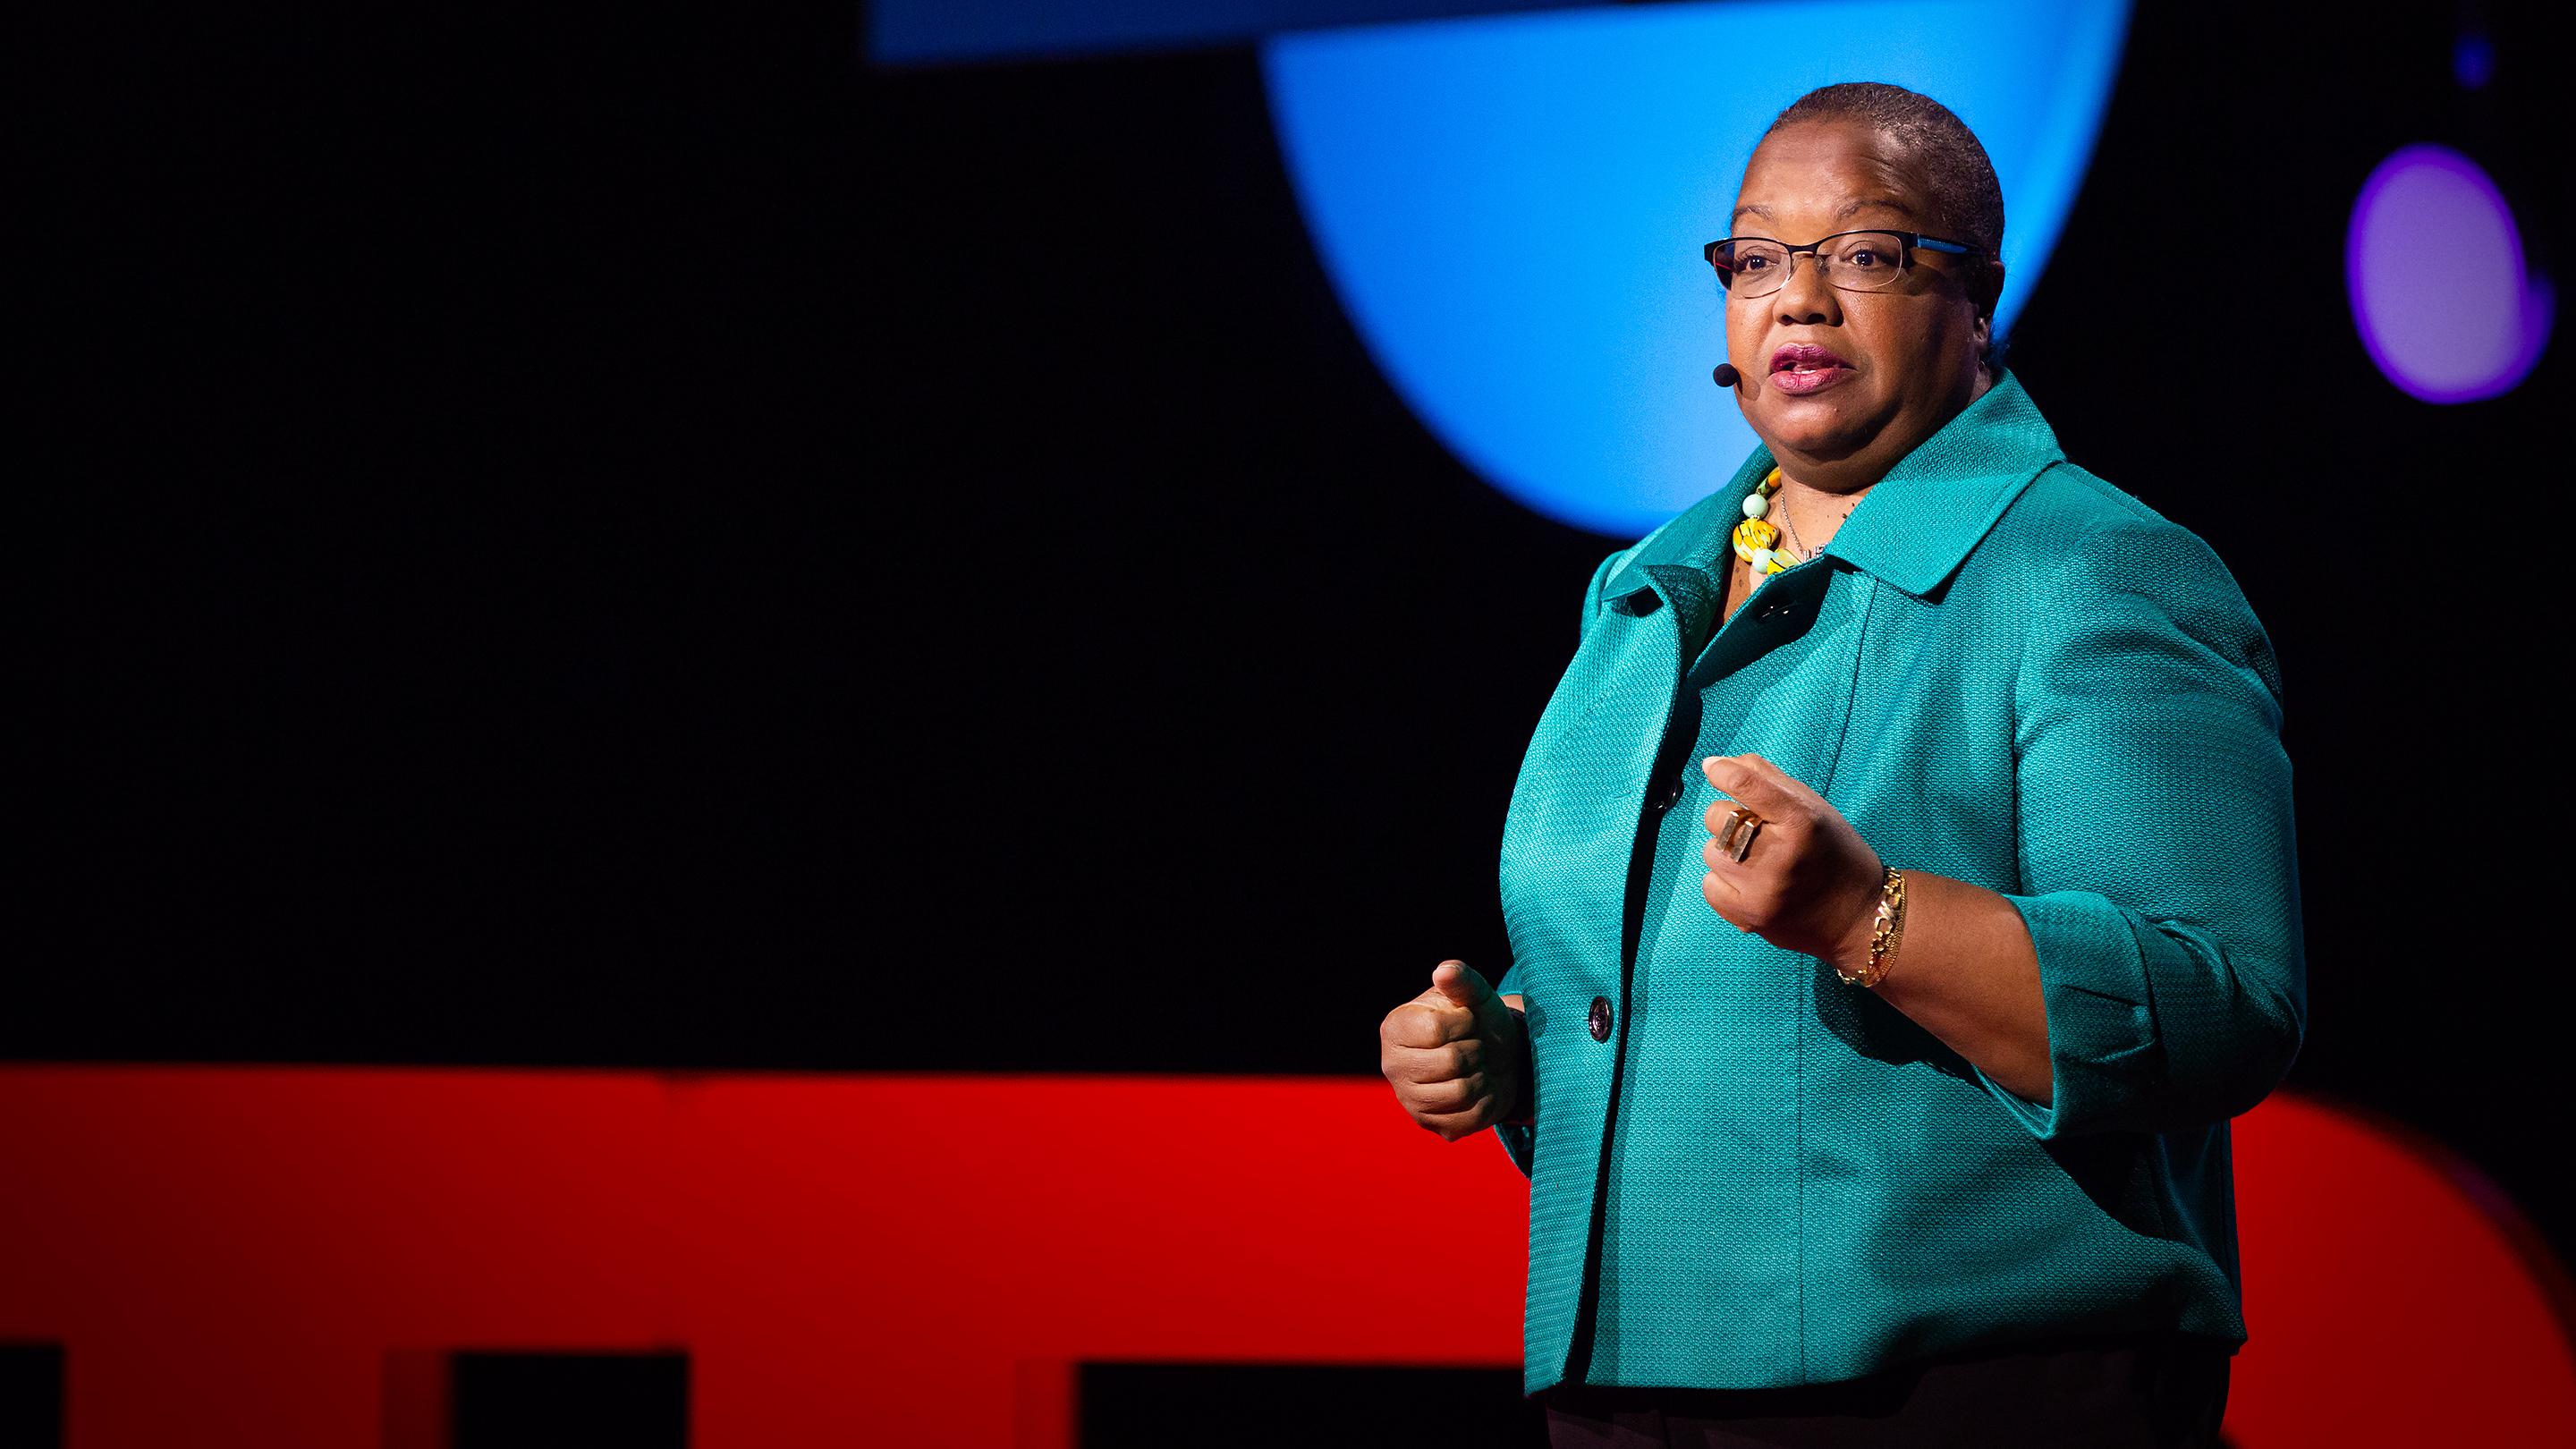 Kym Worthy: What happened when we tested thousands of abandoned rape kits in Detroit | TED Talk